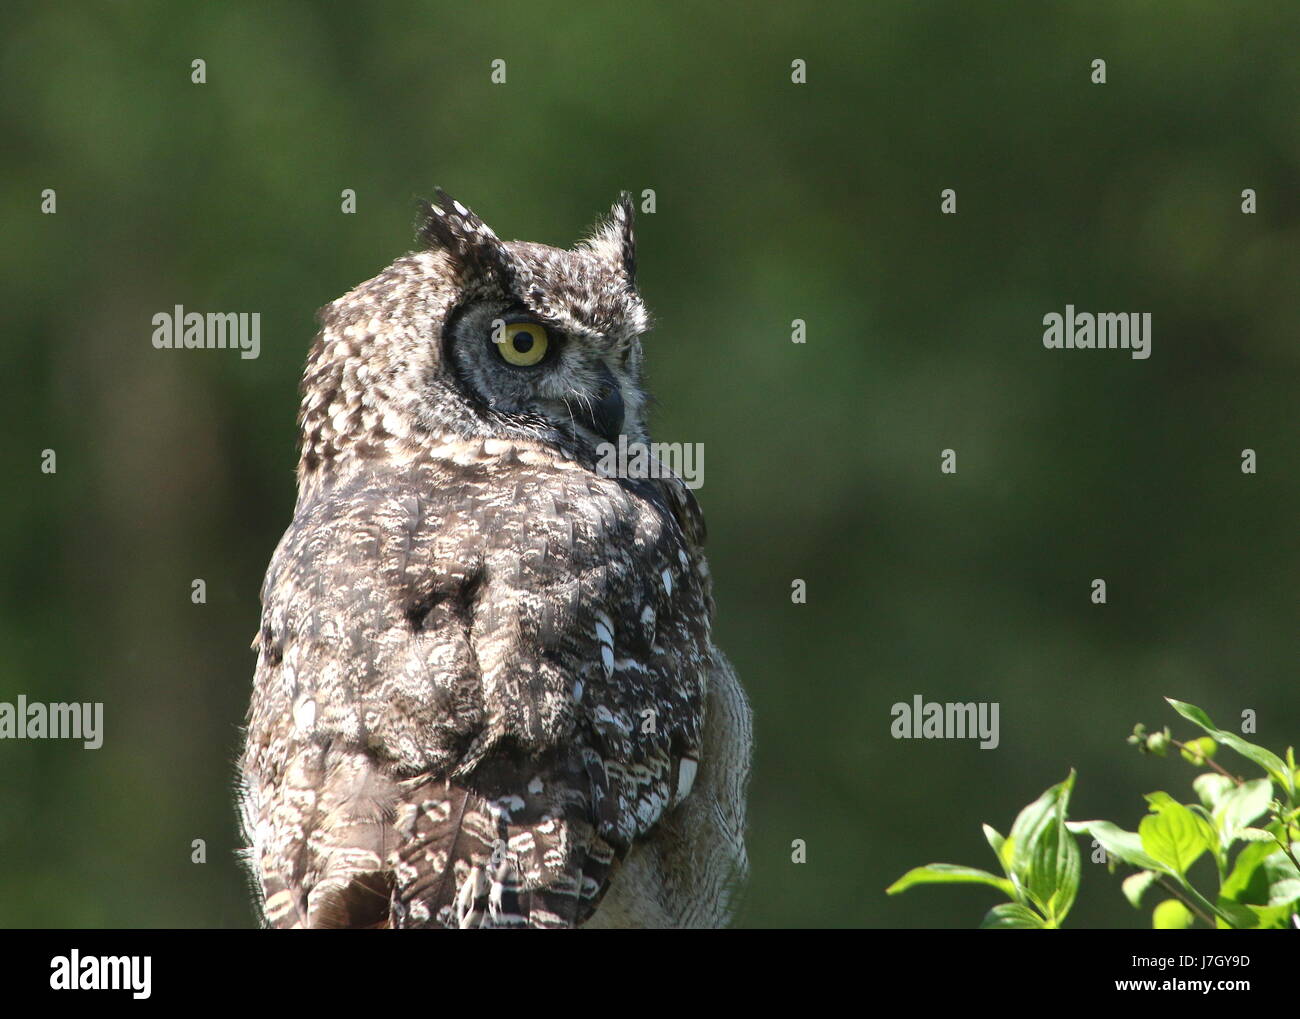 African Spotted Eagle Owl (Bubo africanus), upper body, seen in profile. Stock Photo